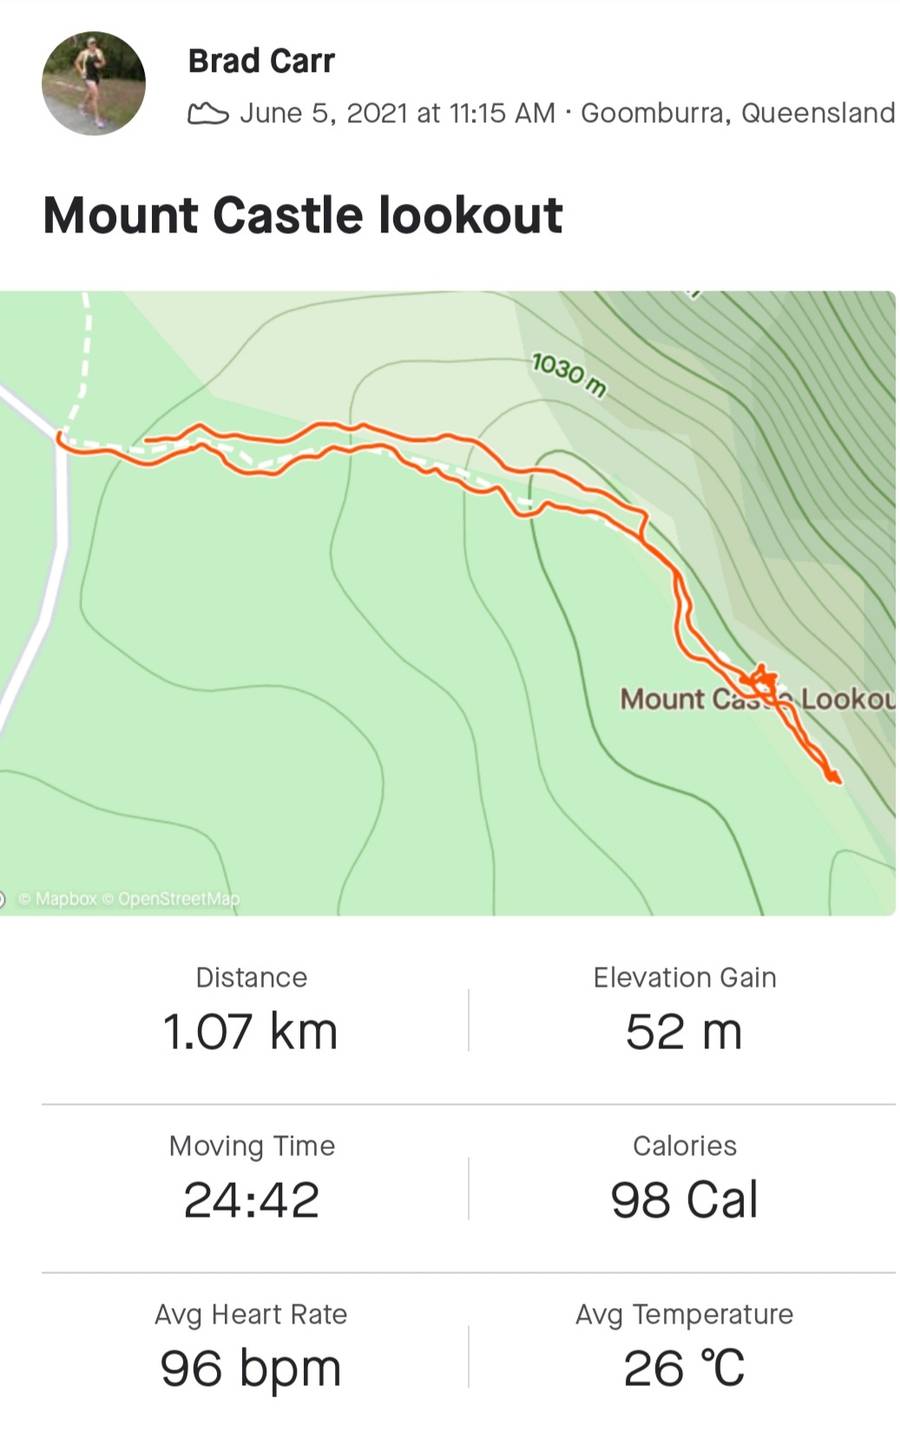 A short but enjoyable stroll to stretch the legs. (Photo is a screenshot of my Strava app)